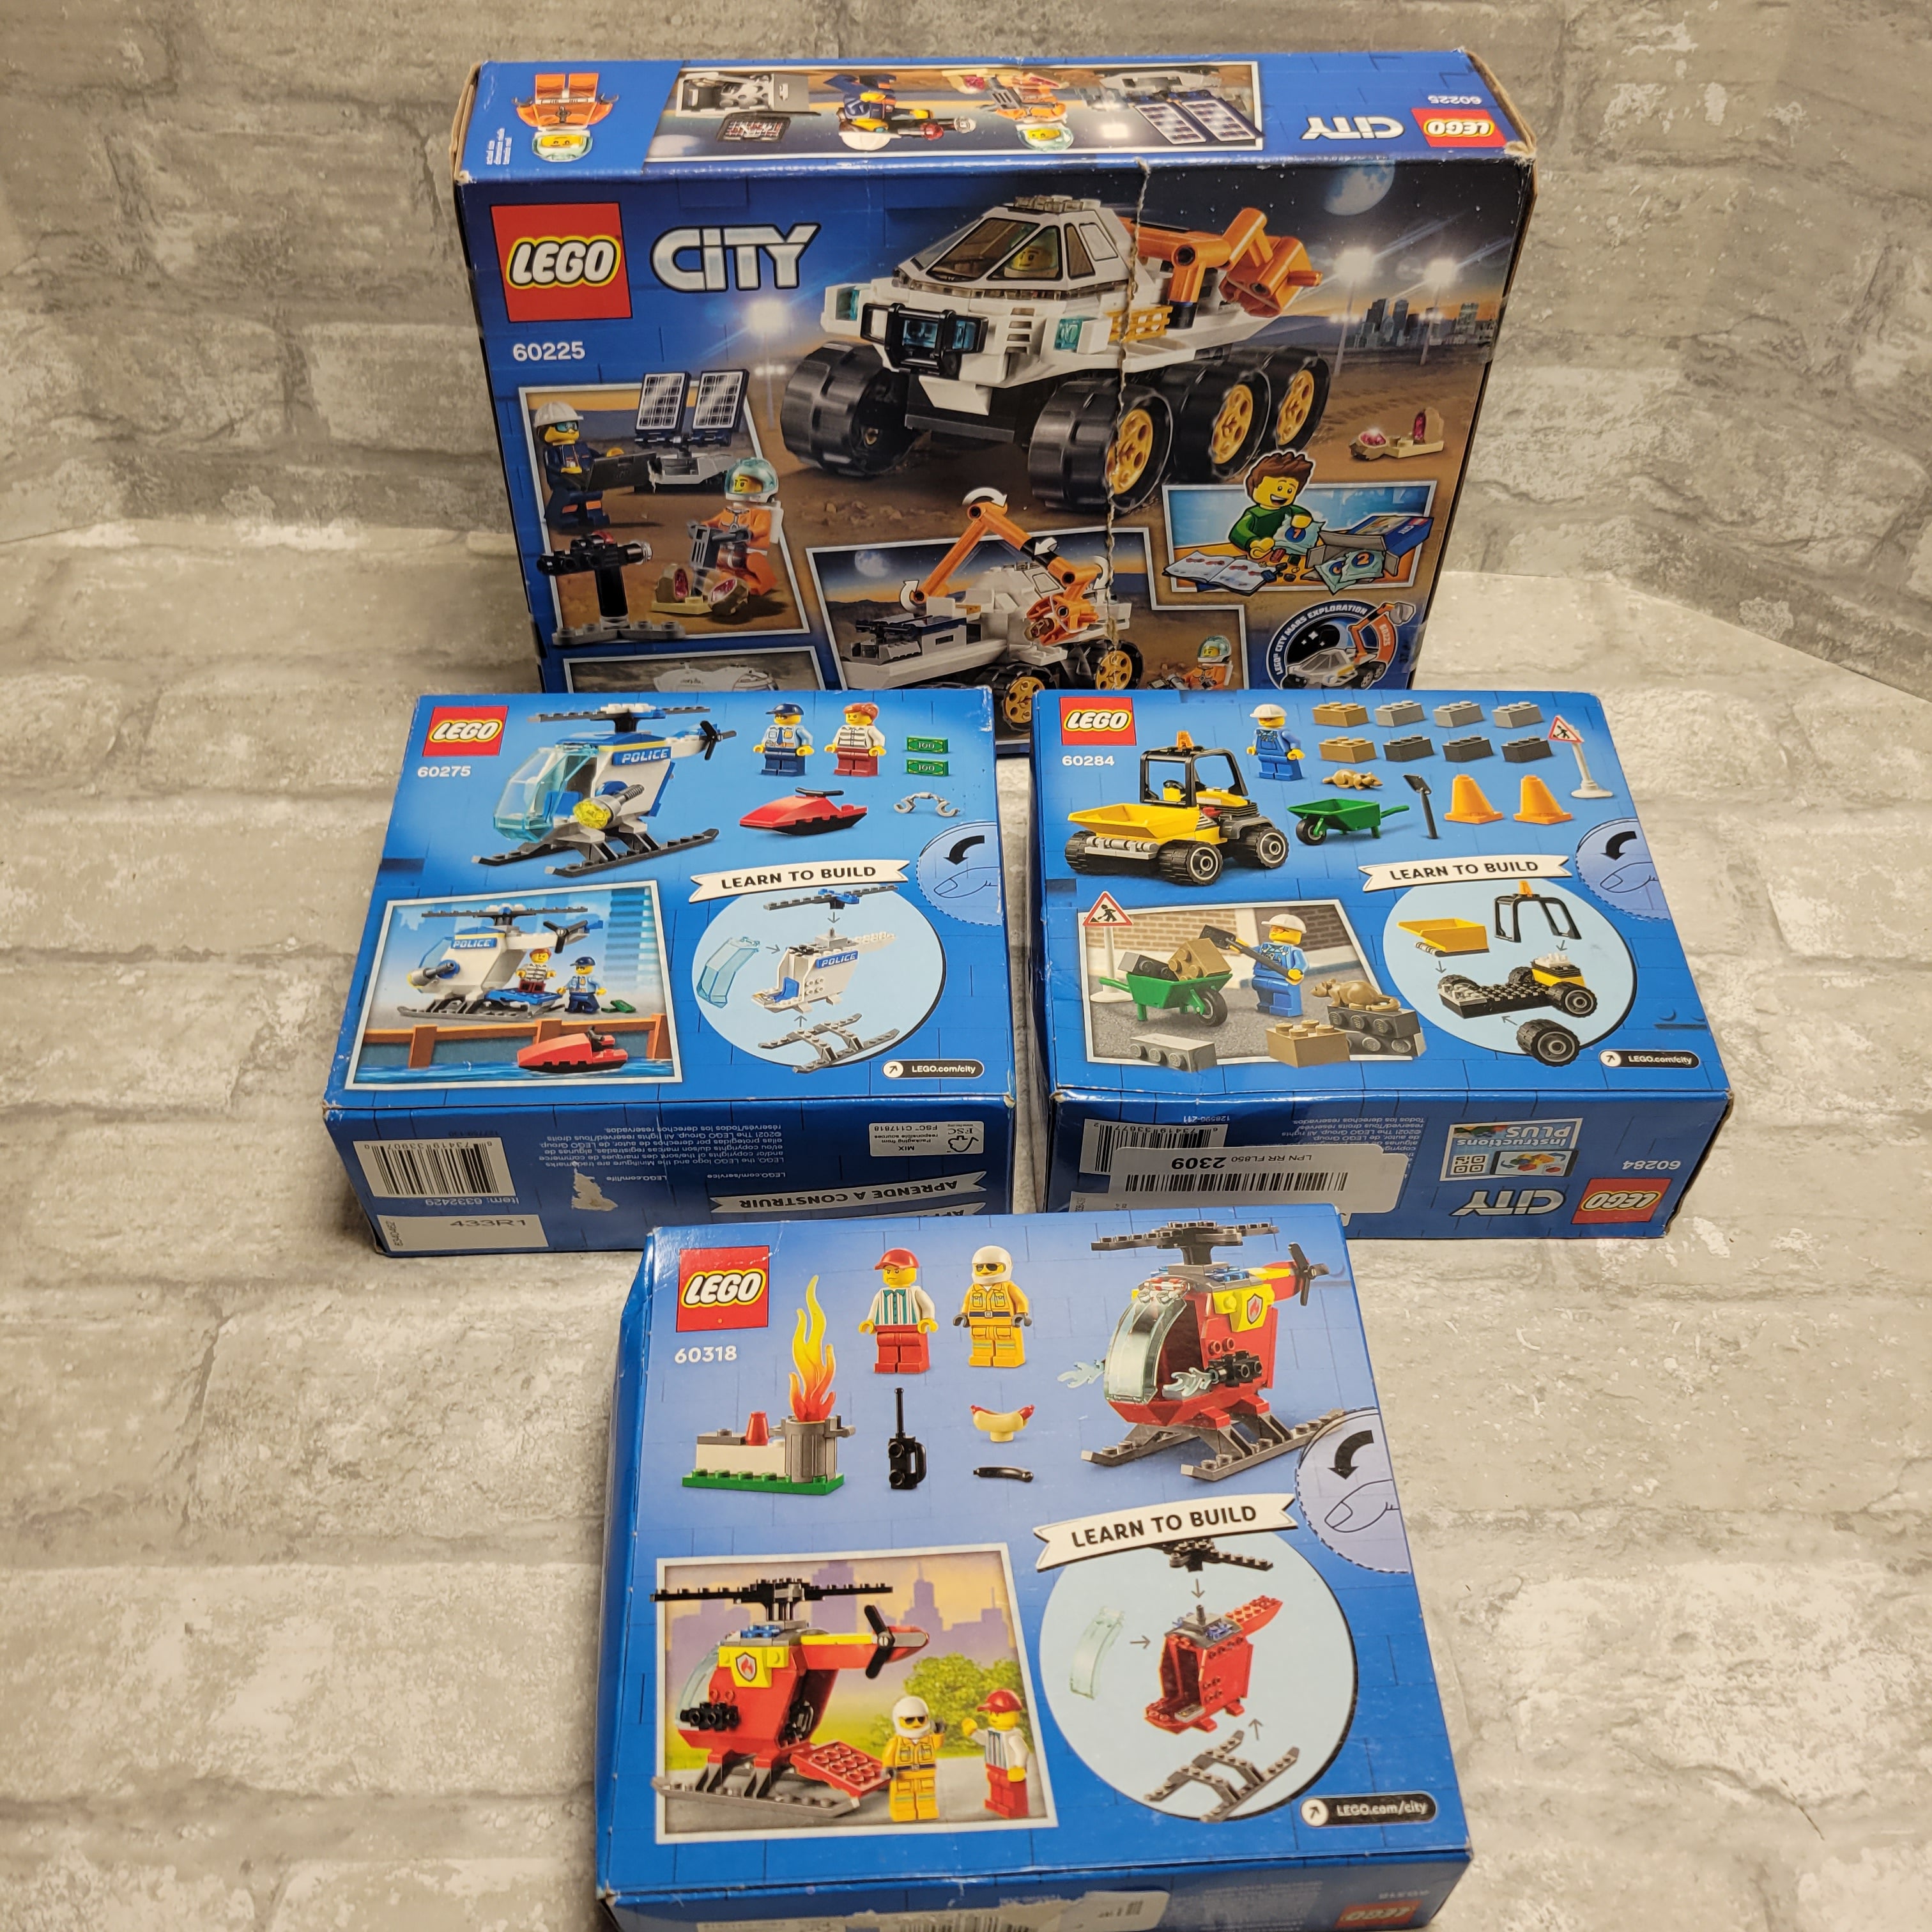 LEGO City Rover Testing, Roadwork Truck, Fire Helicopter, Police Helicopter (8049497800942)